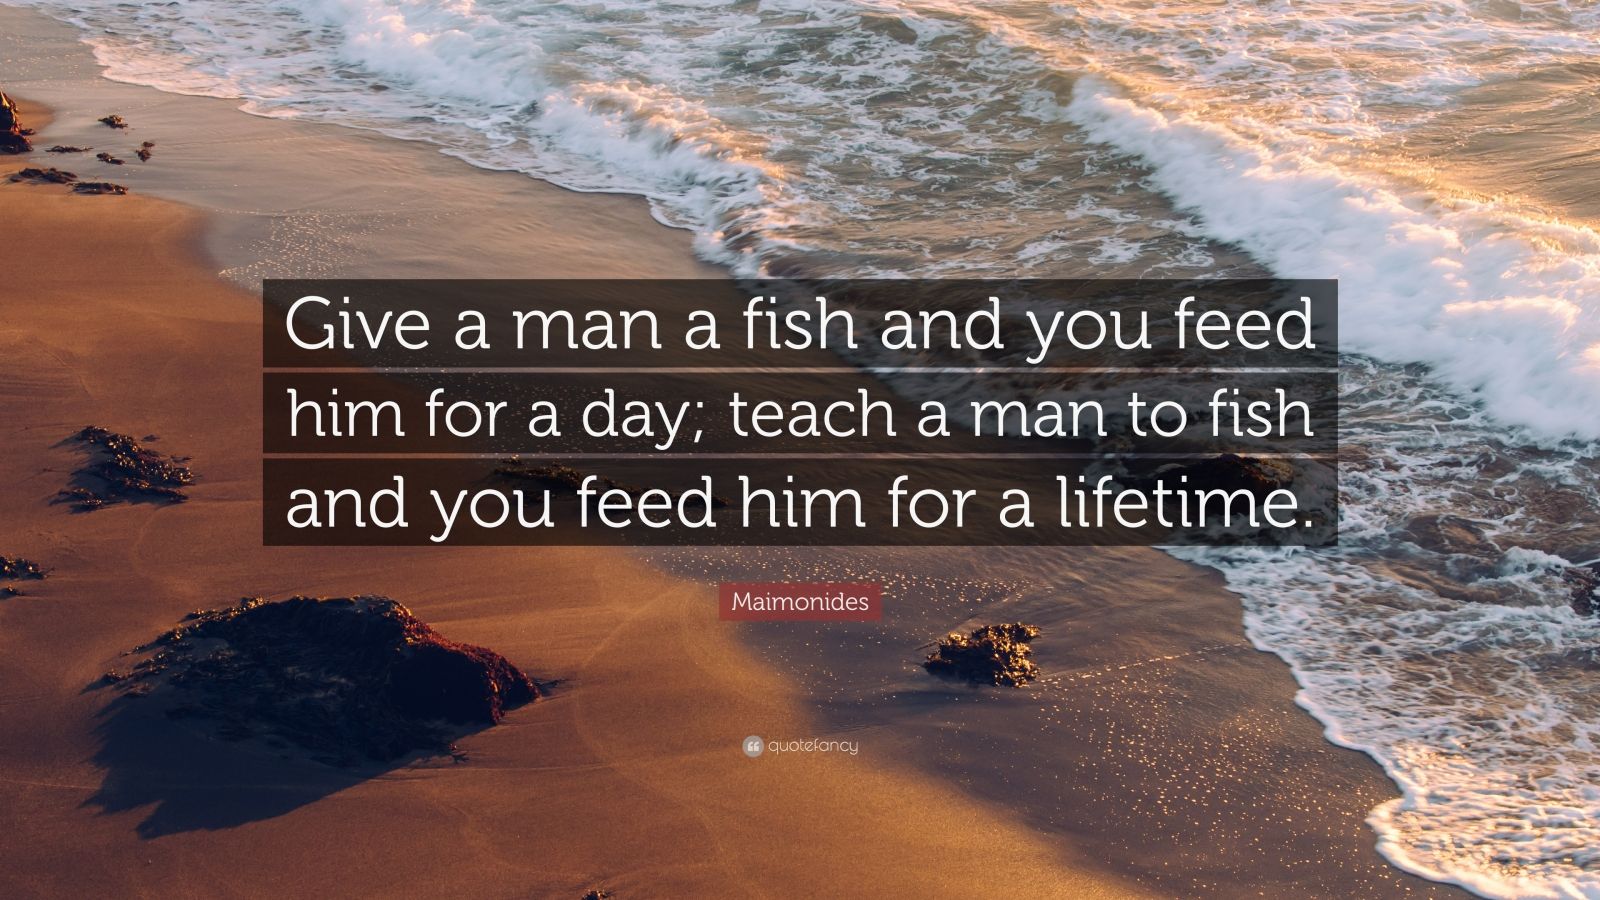 Maimonides Quote: “Give a man a fish and you feed him for a day; teach